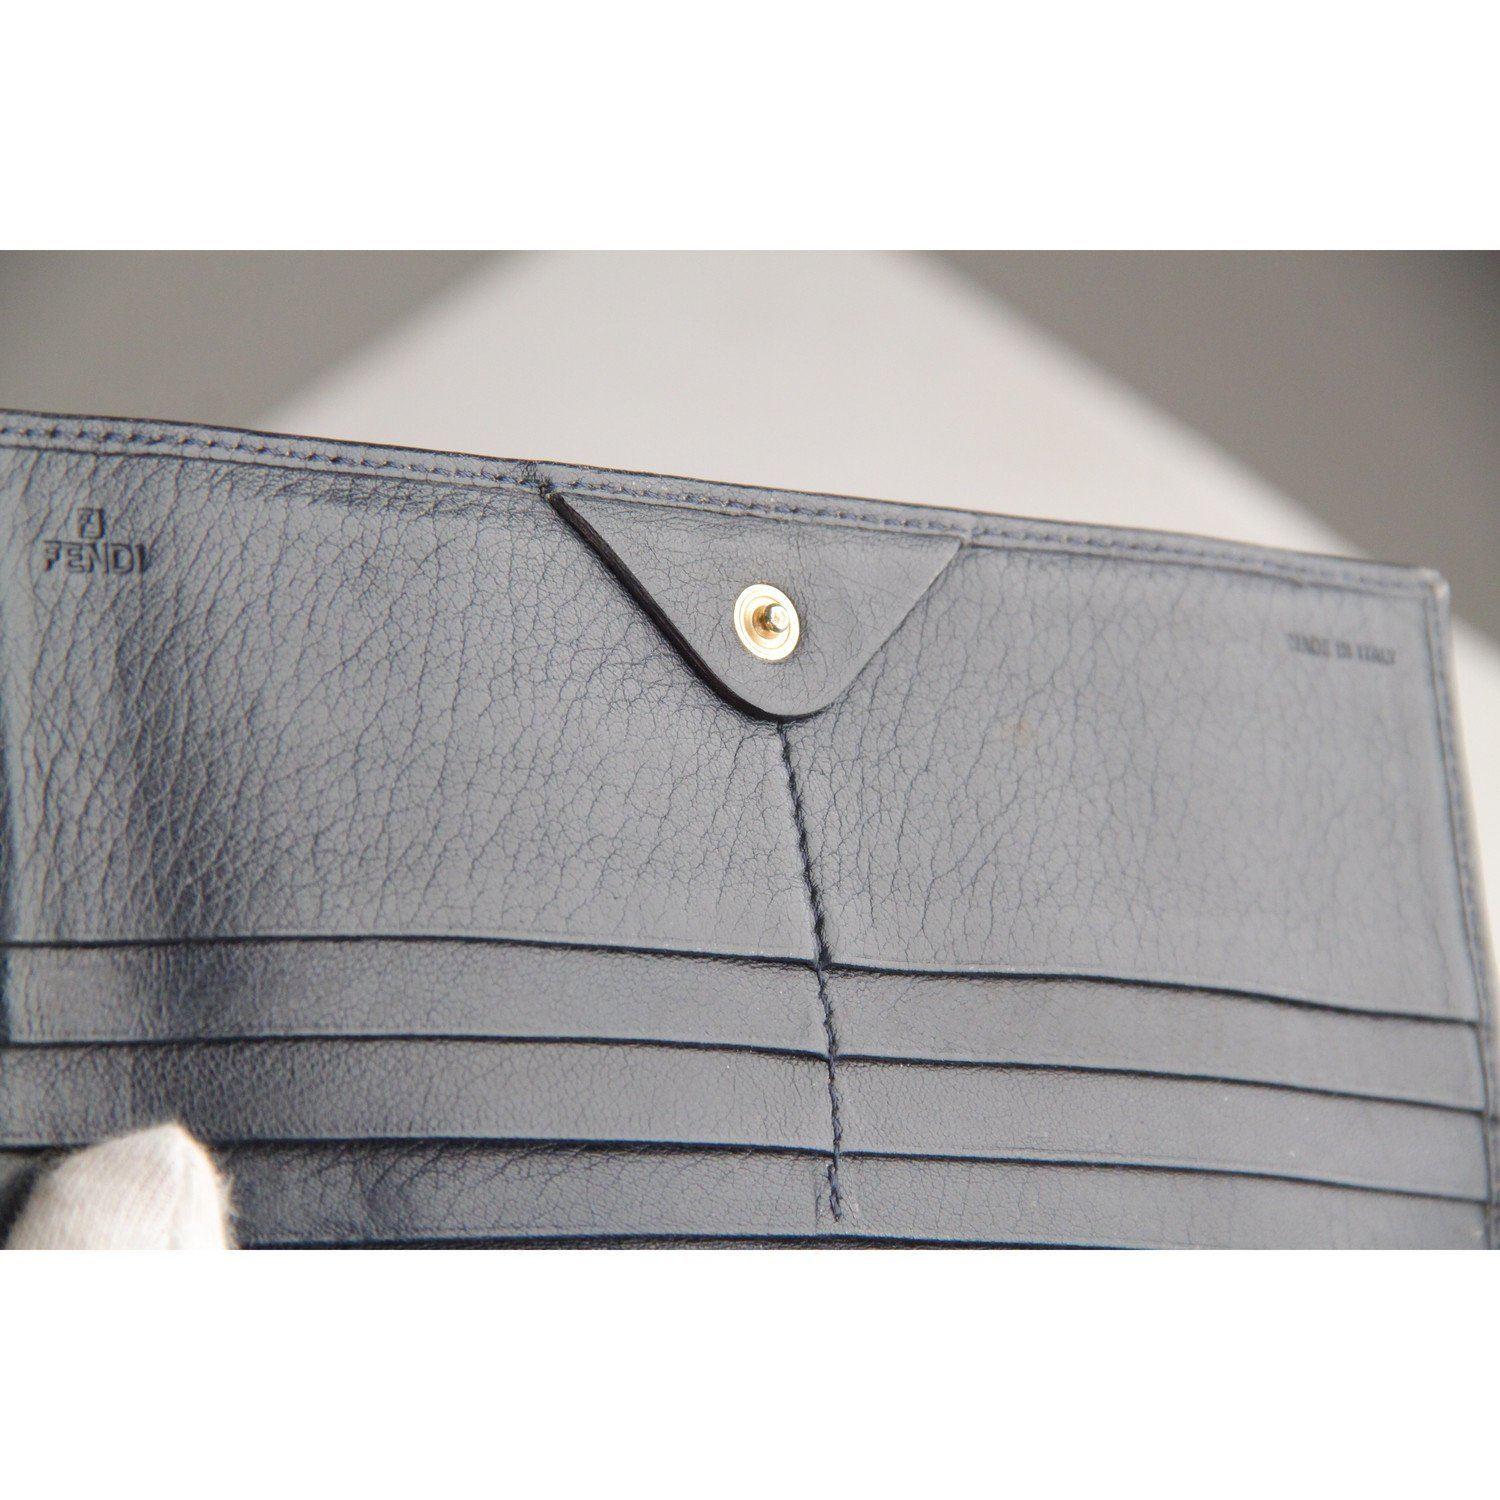 MATERIAL: Canvas COLOR: Black MODEL: Long Wallet GENDER: Women CONDITION RATING: B :GOOD CONDITION - Some light wear of use CONDITION DETAILS: Some normal wear of use on leather trim MEASUREMENTS: HEIGHT: 4 inches - 10,2 cm LENGTH: 7.5 inches - 19